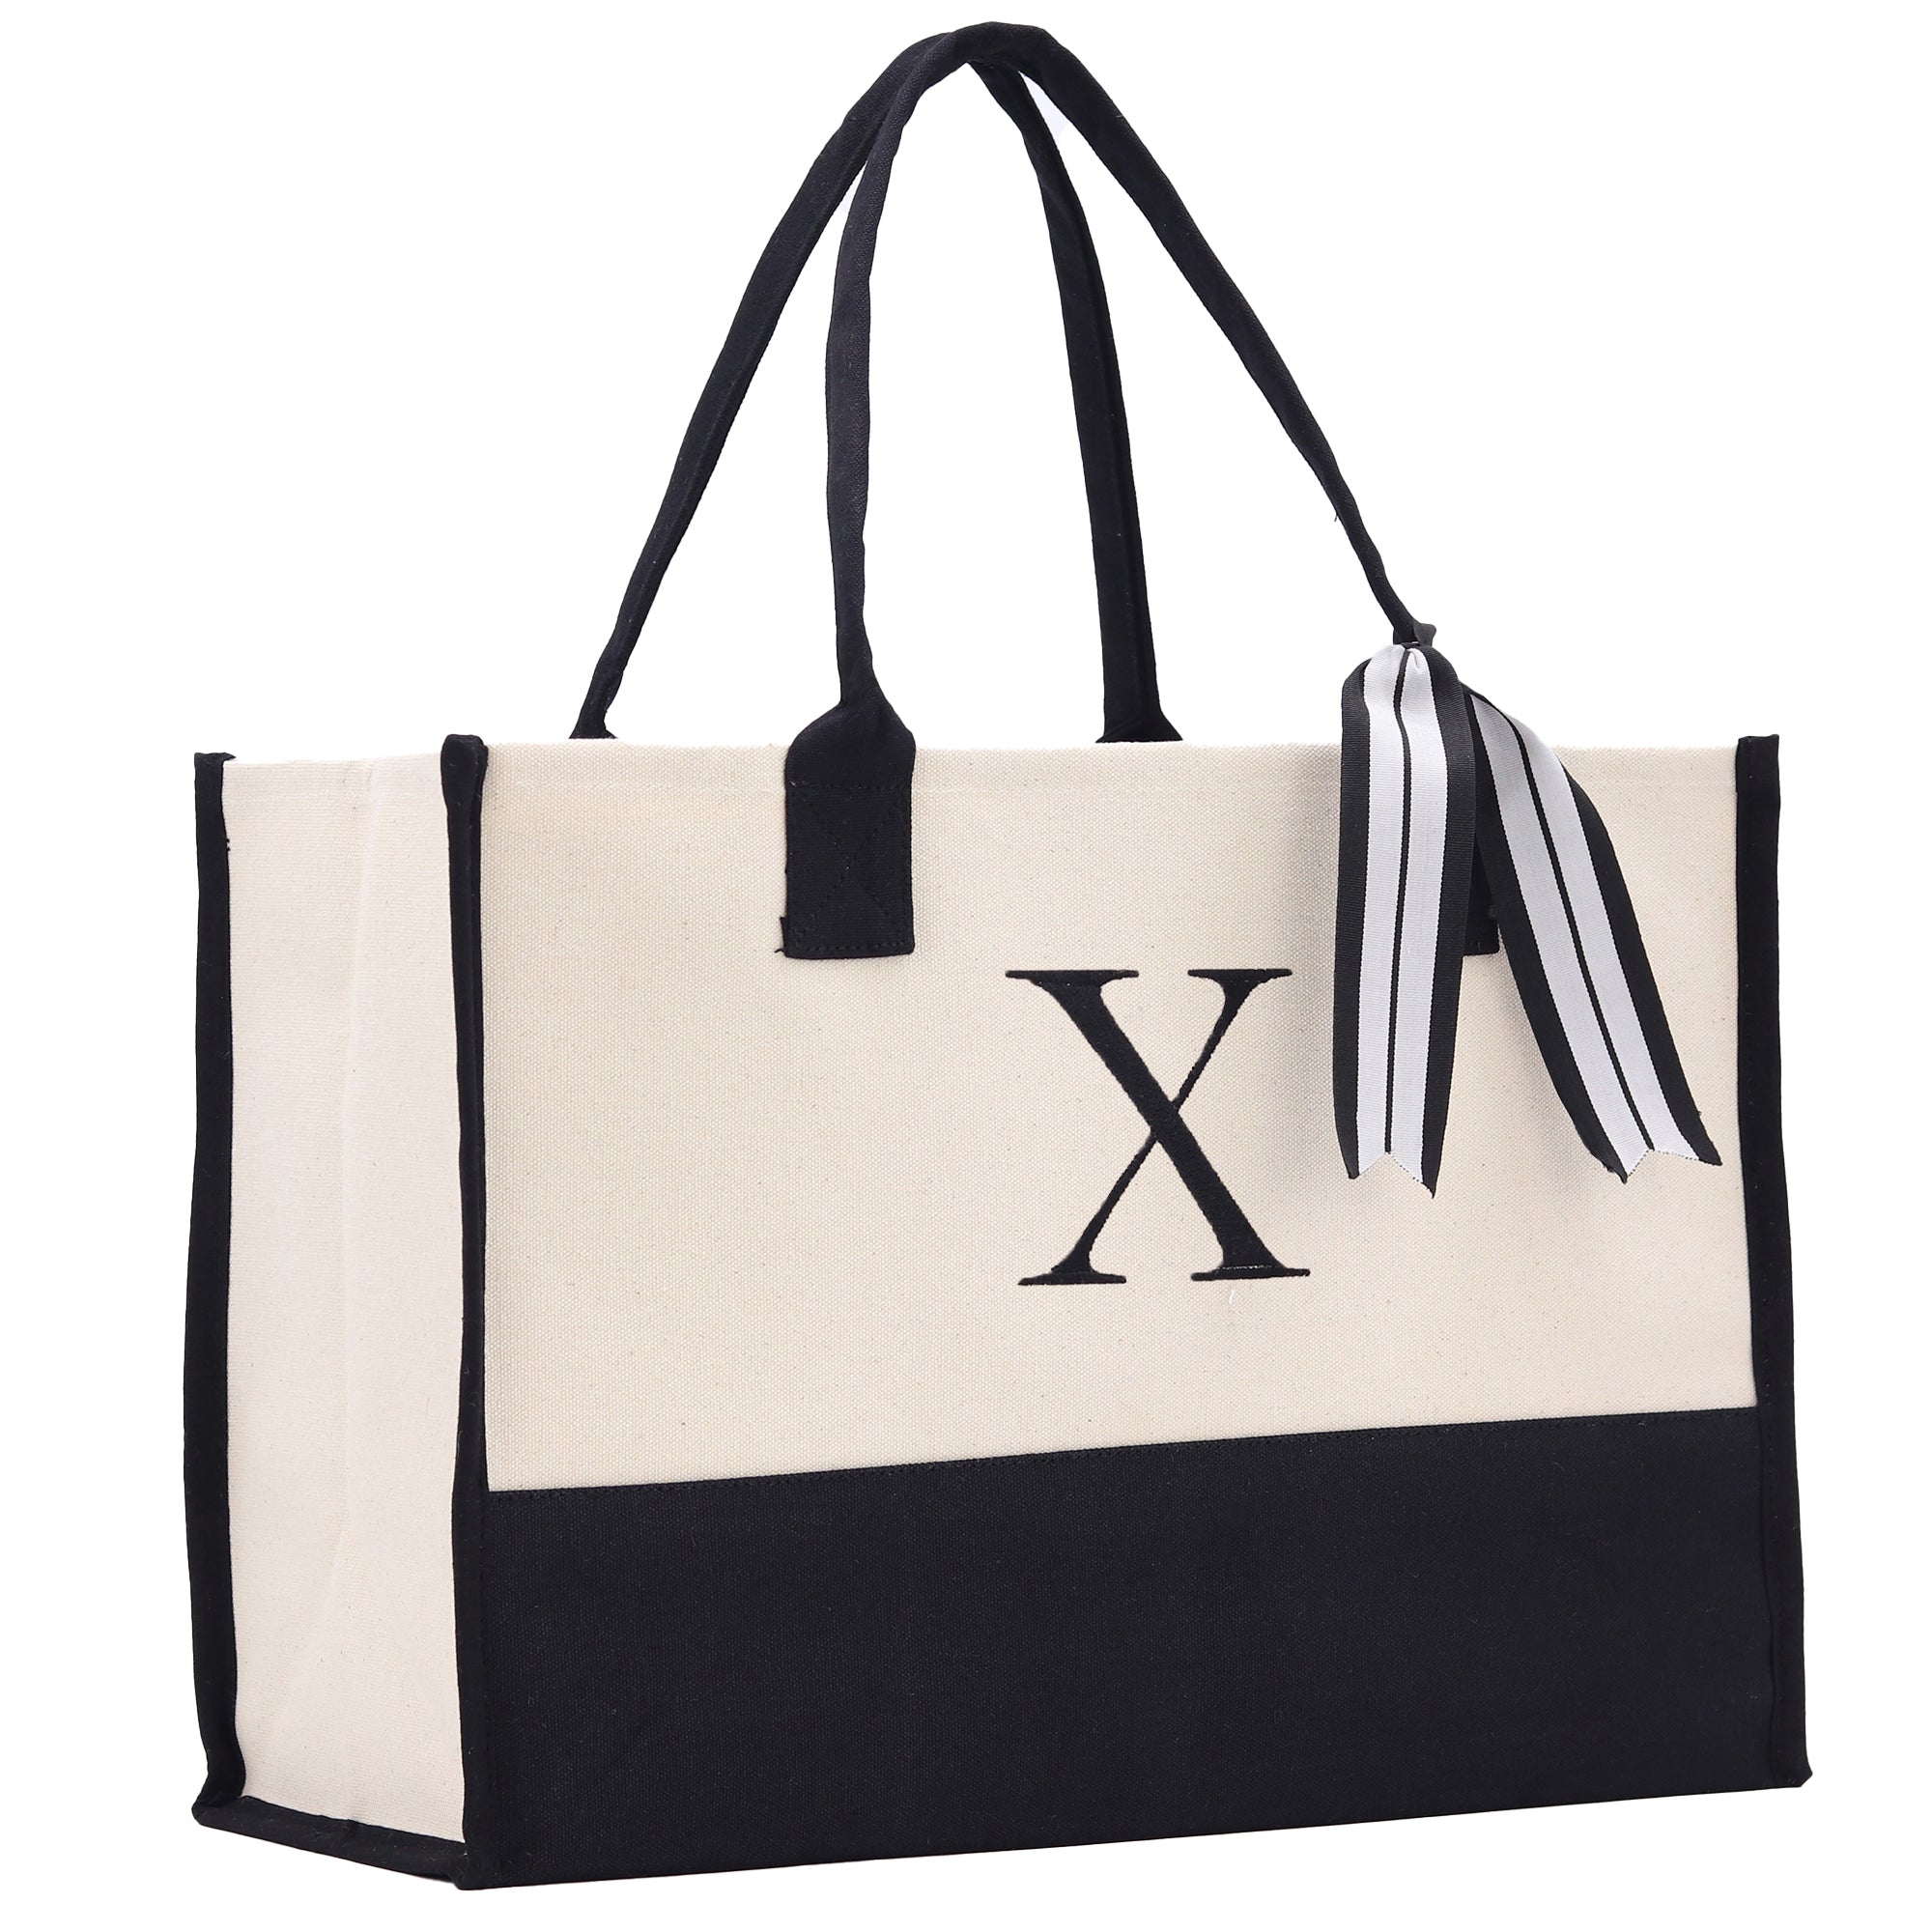 Monogram Tote Bag with 100% Cotton Canvas and a Chic Personalized